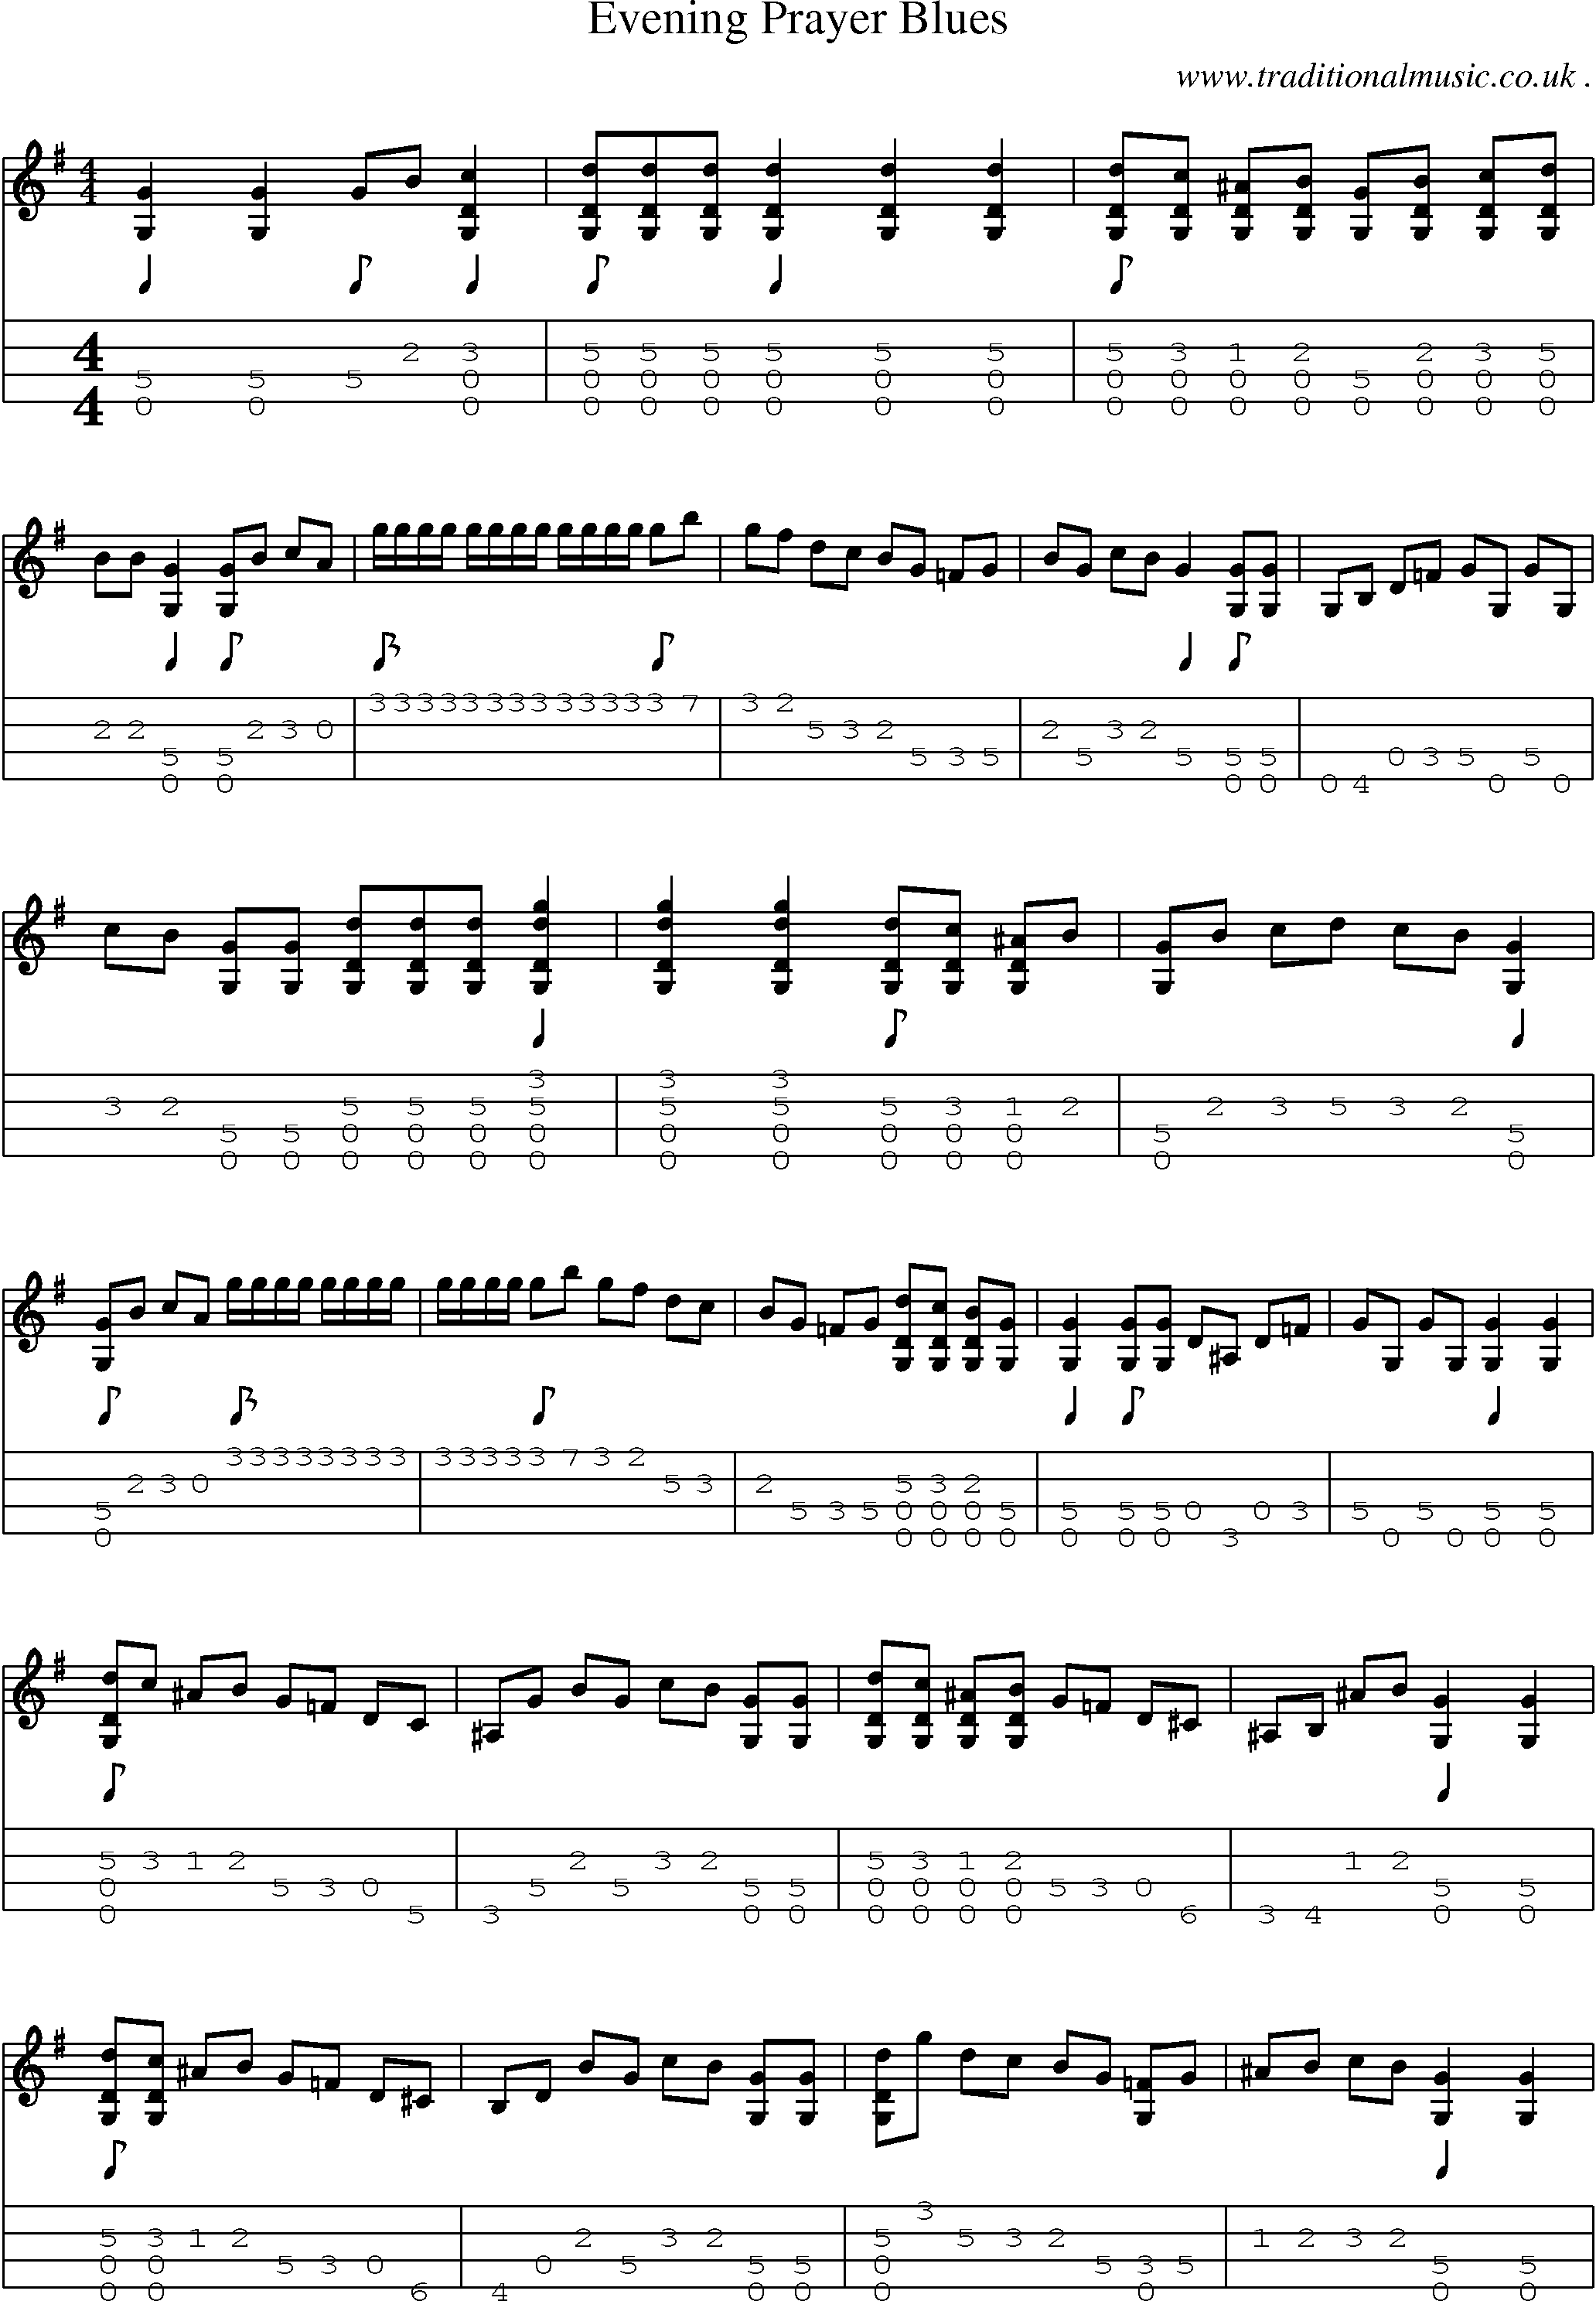 Music Score and Guitar Tabs for Evening Prayer Blues